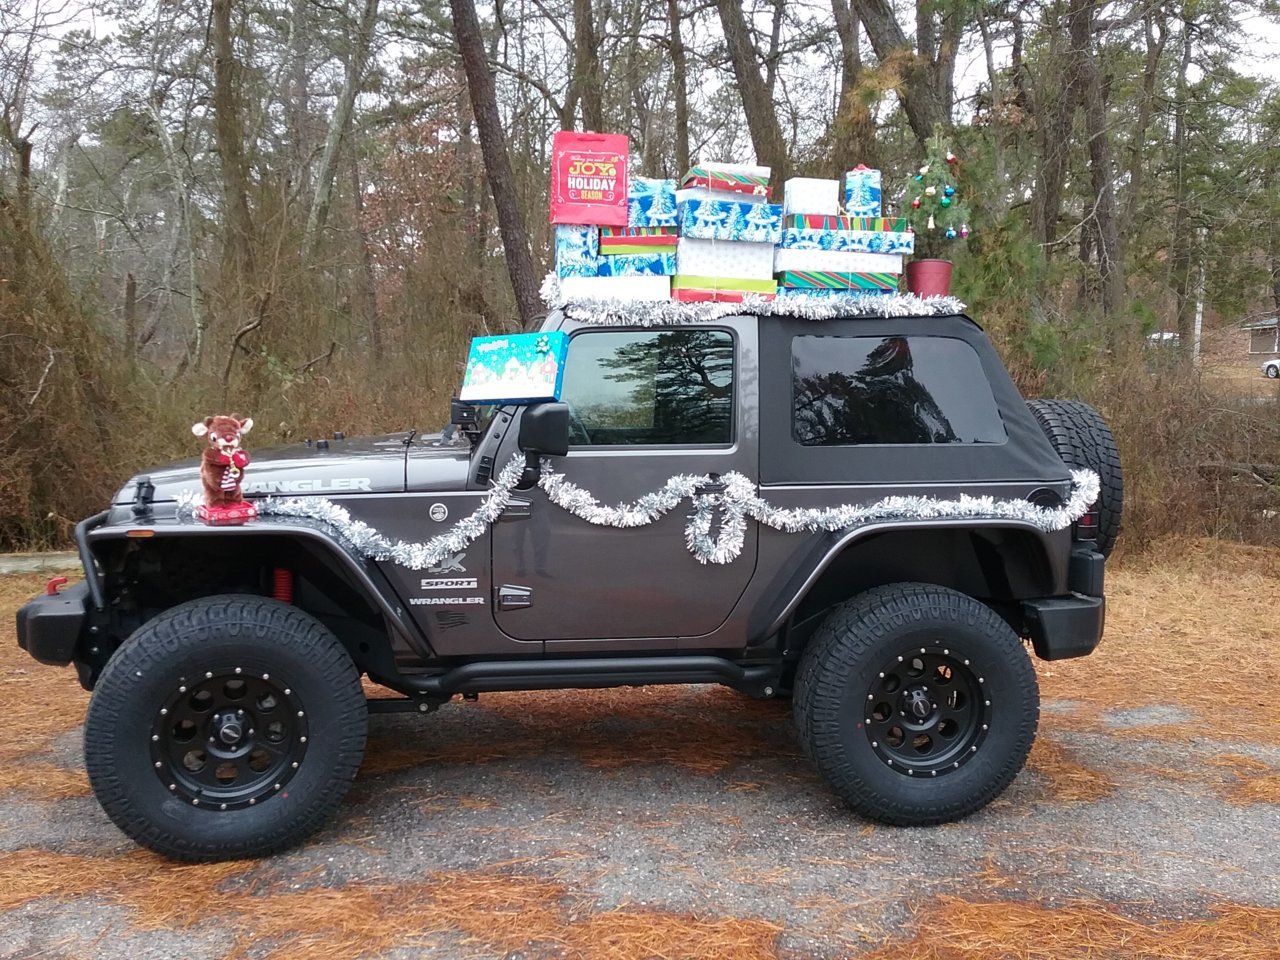 Merry Christmas Jeepers!  Forum